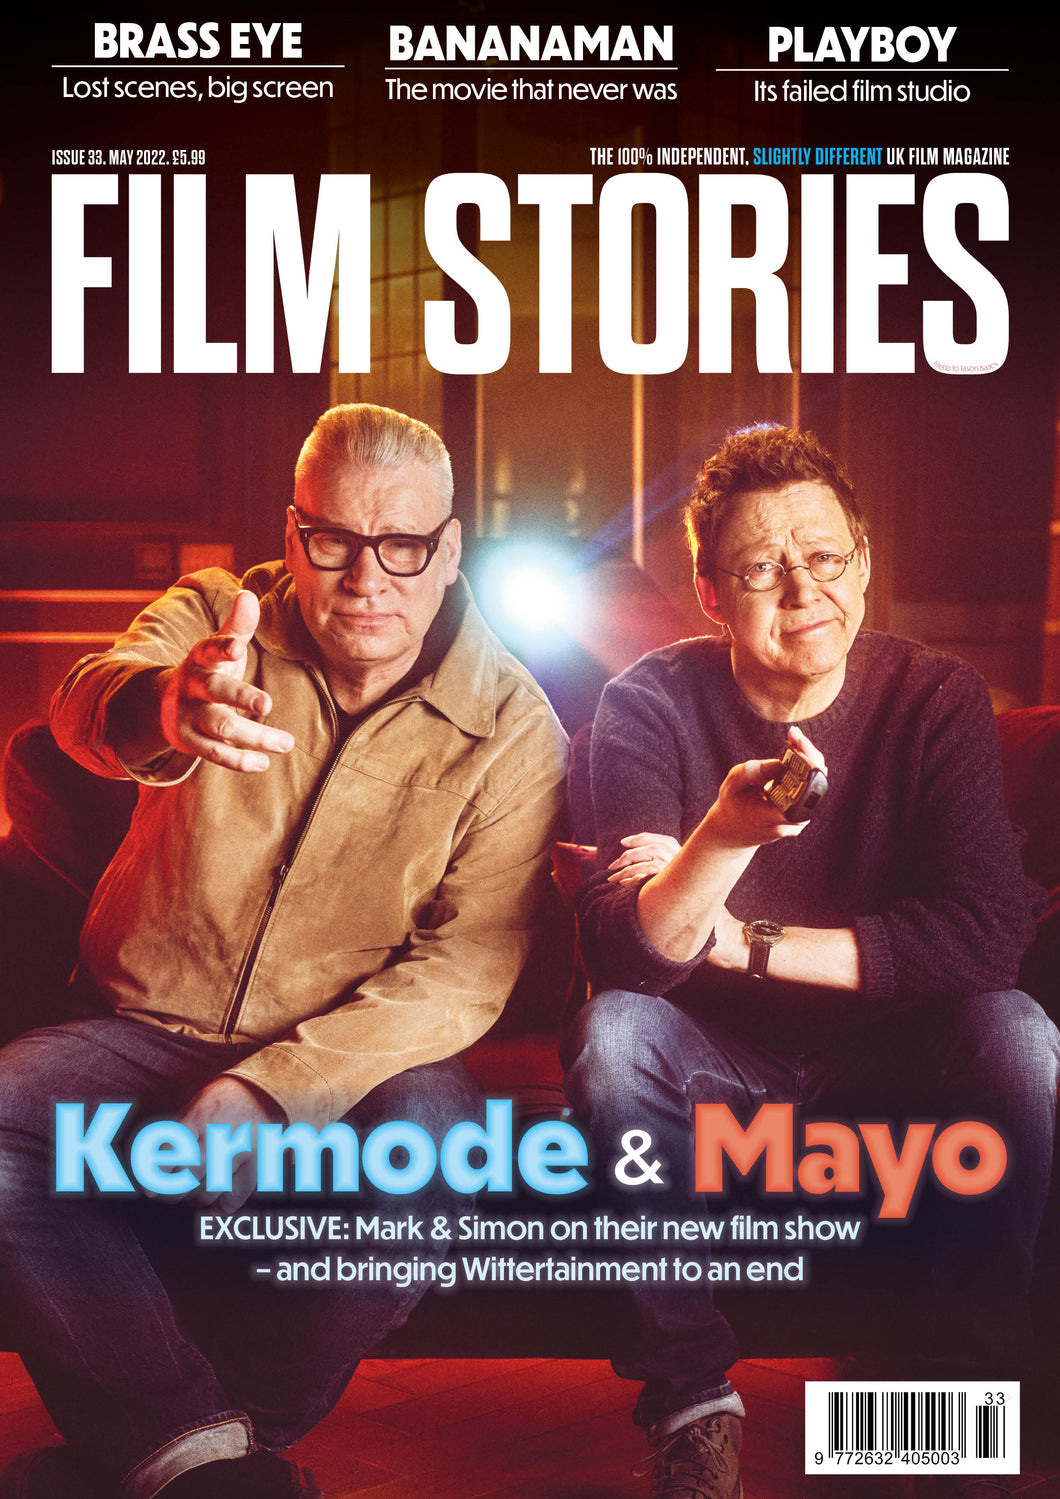 Film Stories issue 33 print edition (May 2022)